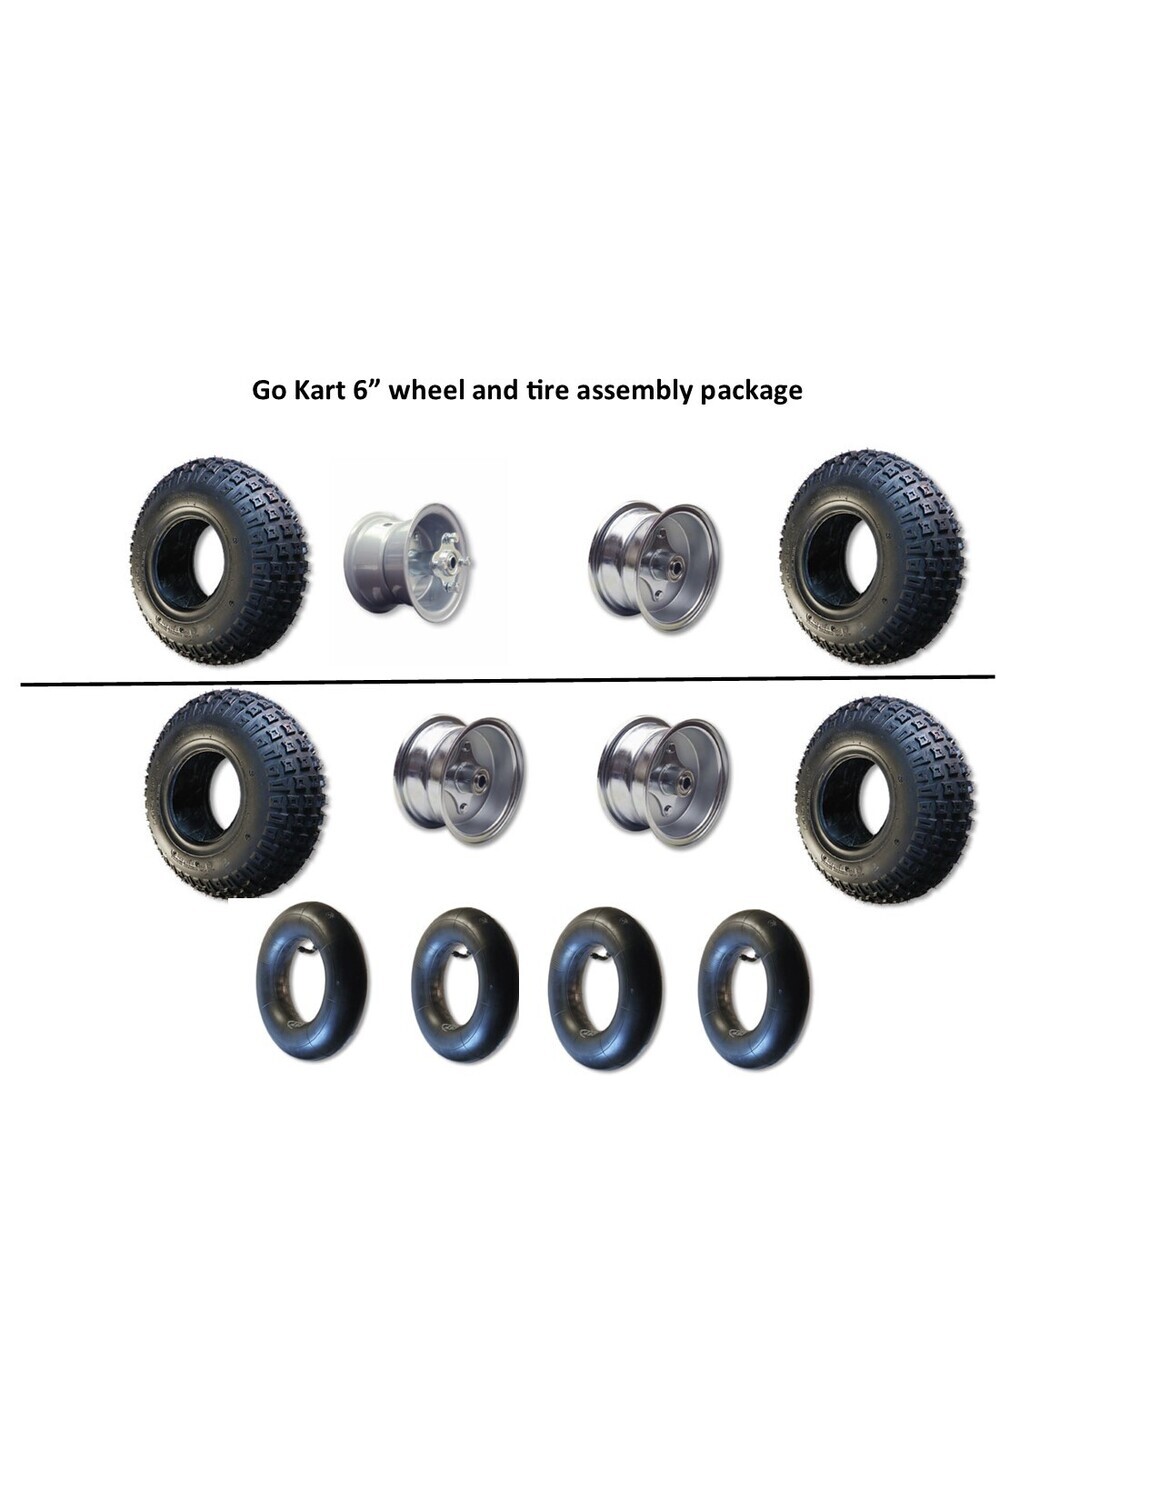 Go Kart Dead Axle Tire and Wheel Package 6"